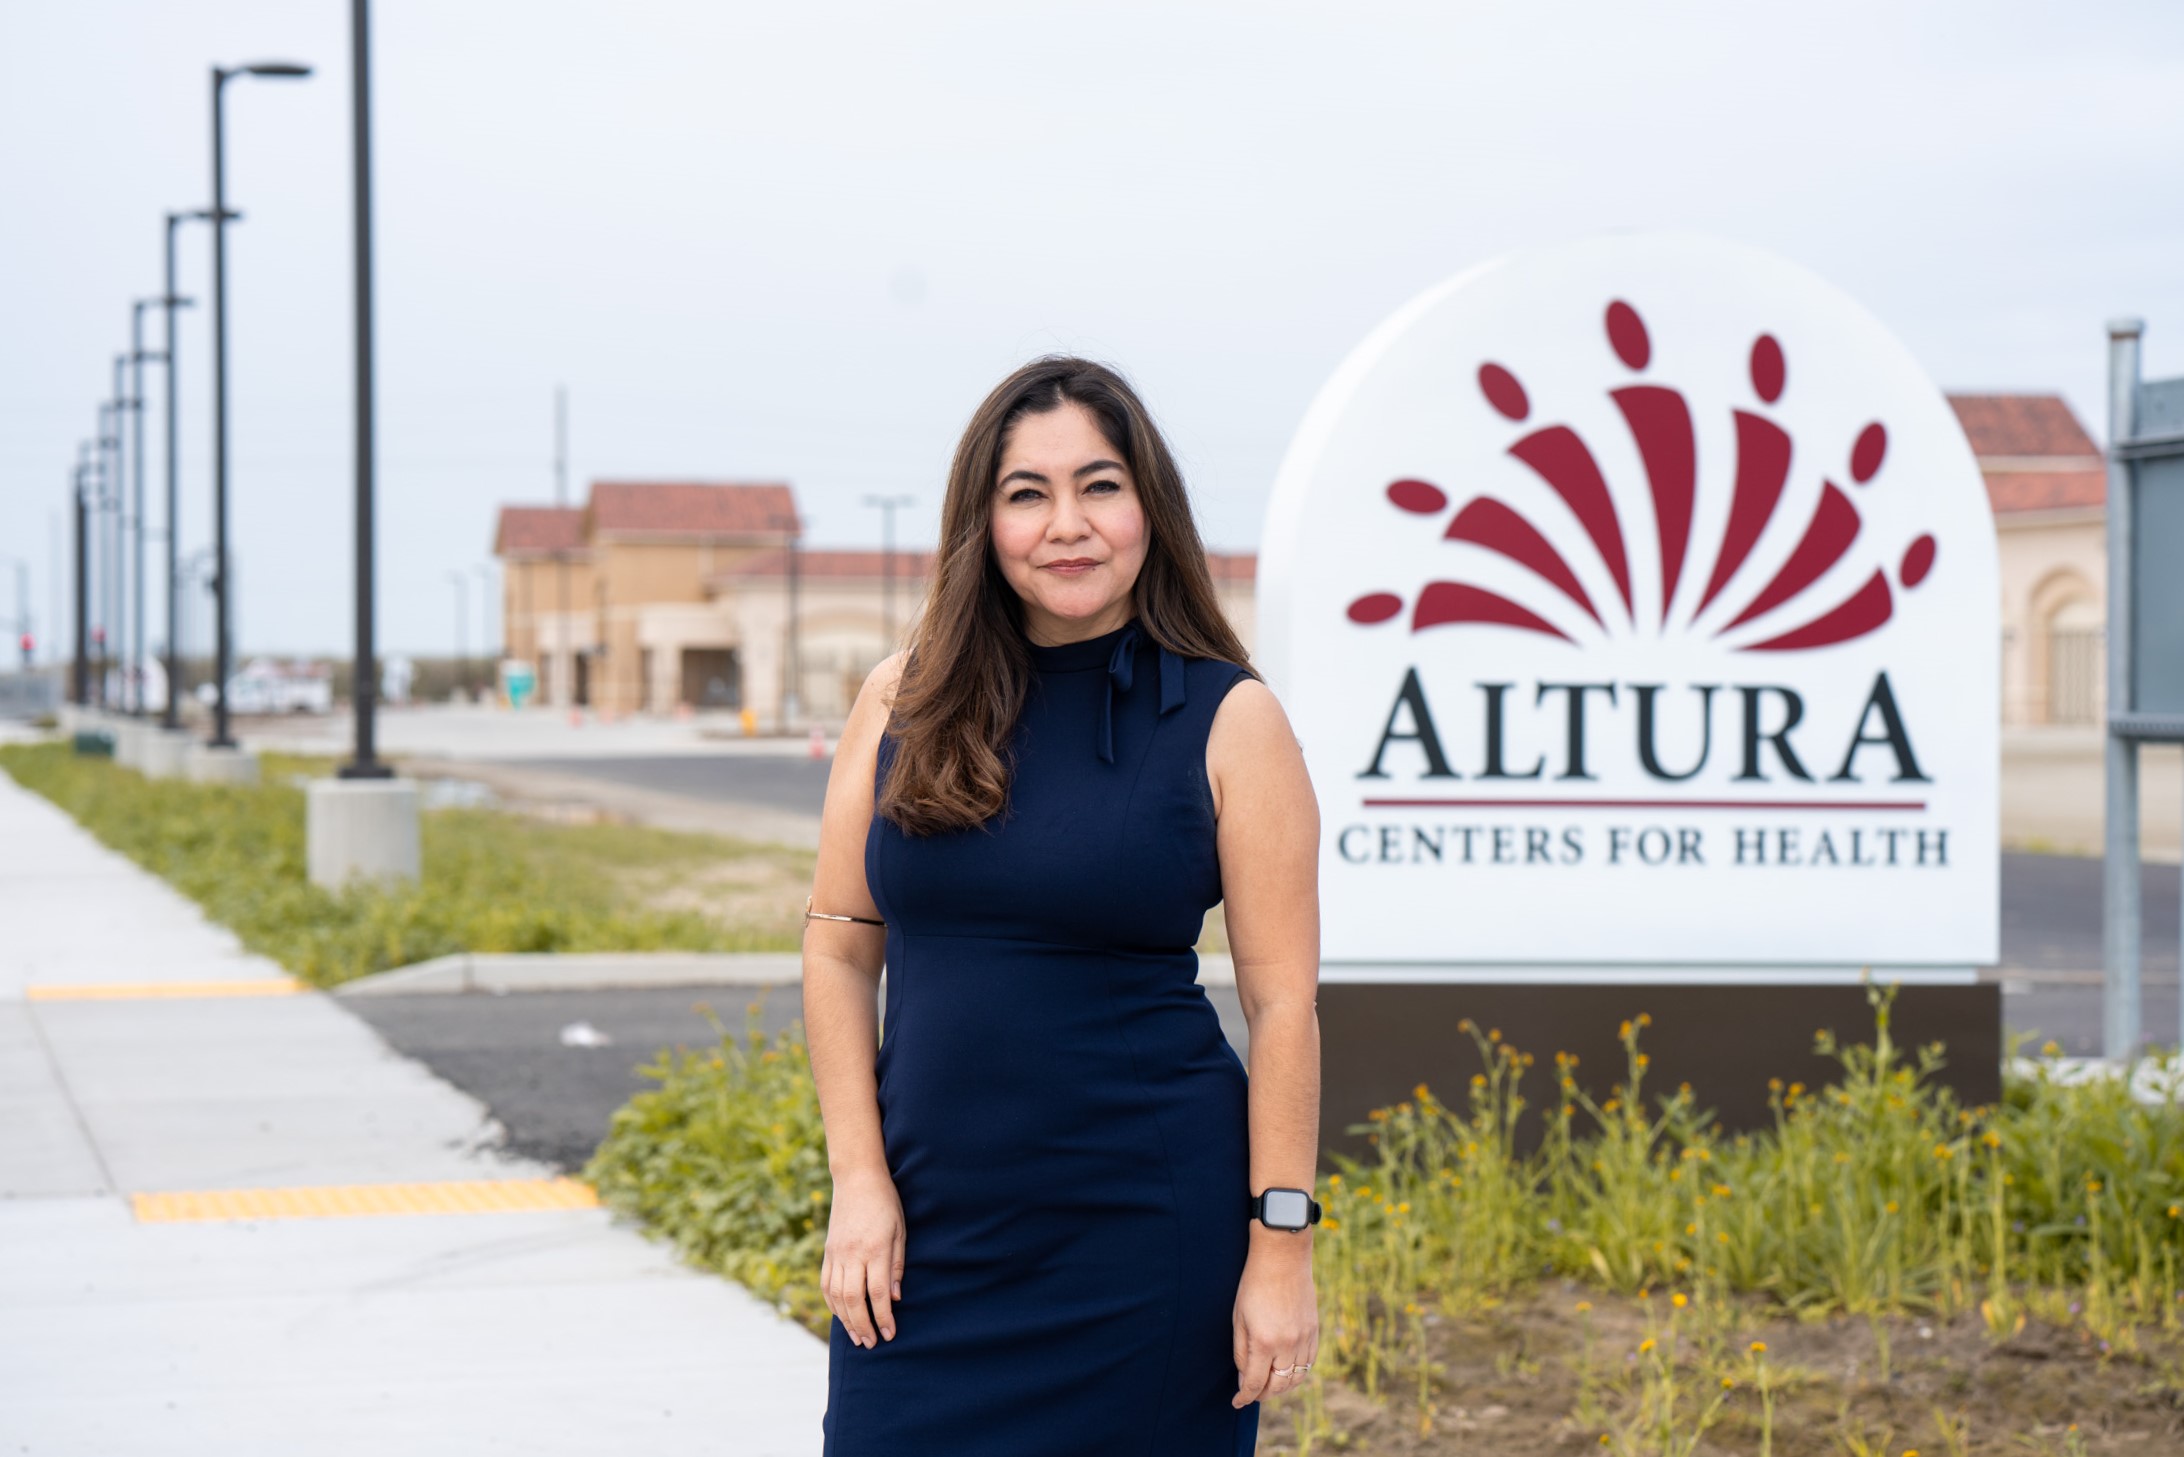 Graciela Soto Perez, chief executive officer at Altura Centers for Health in Tulare County smiles at the camera while standing in front of a sign saying 'Altura Centers for Health'